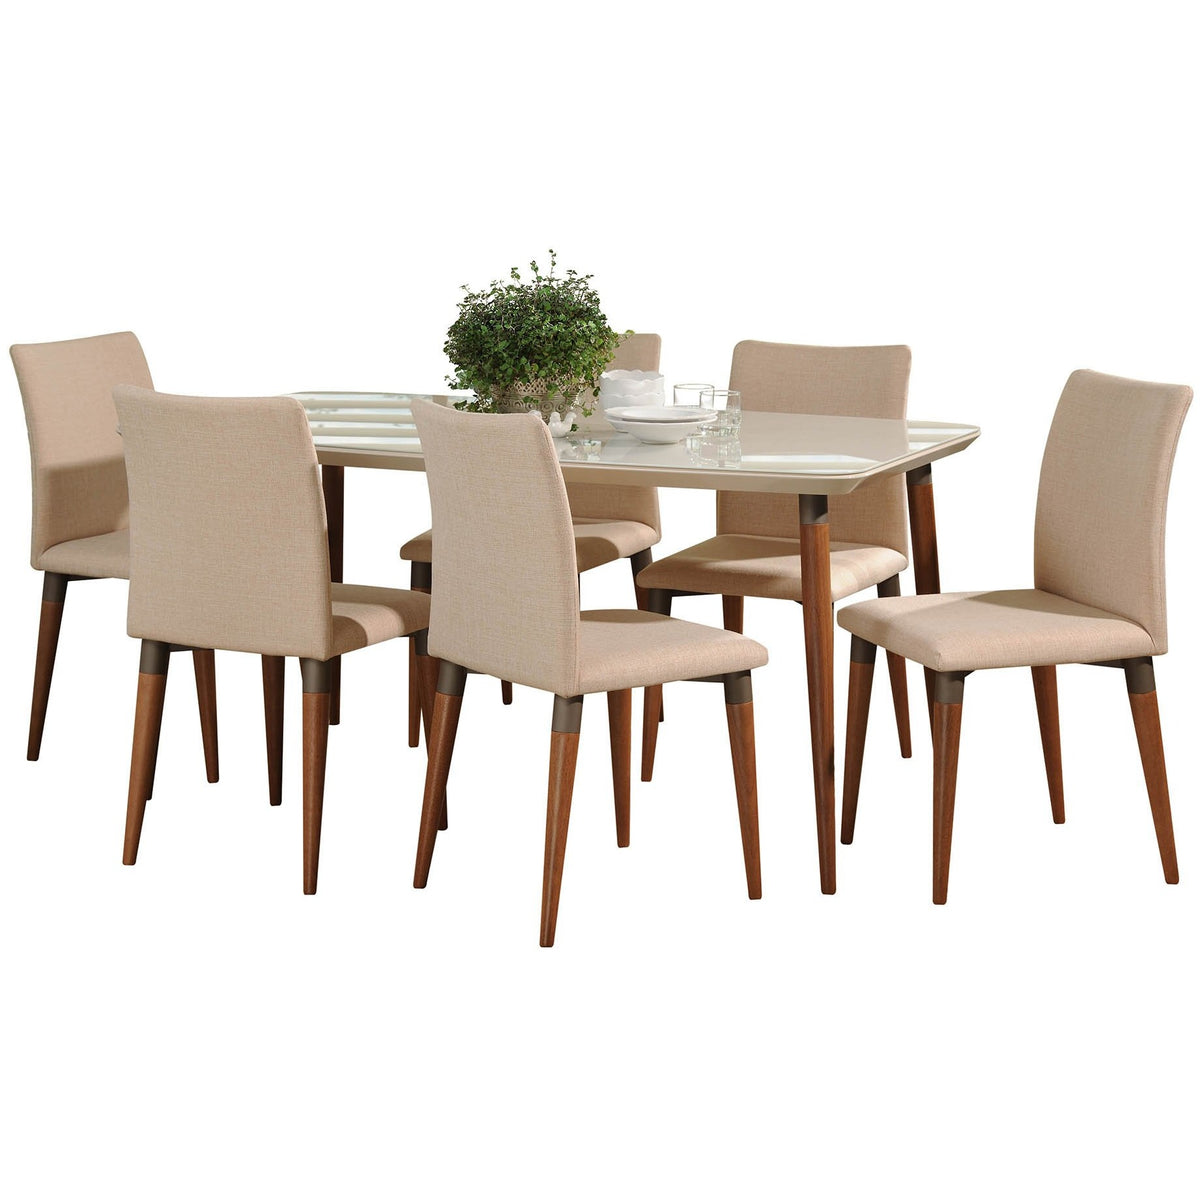 Manhattan Comfort 7-Piece Charles 62.99" Dining Set with 6 Dining Chairs in Off White and Dark Beige-Minimal & Modern